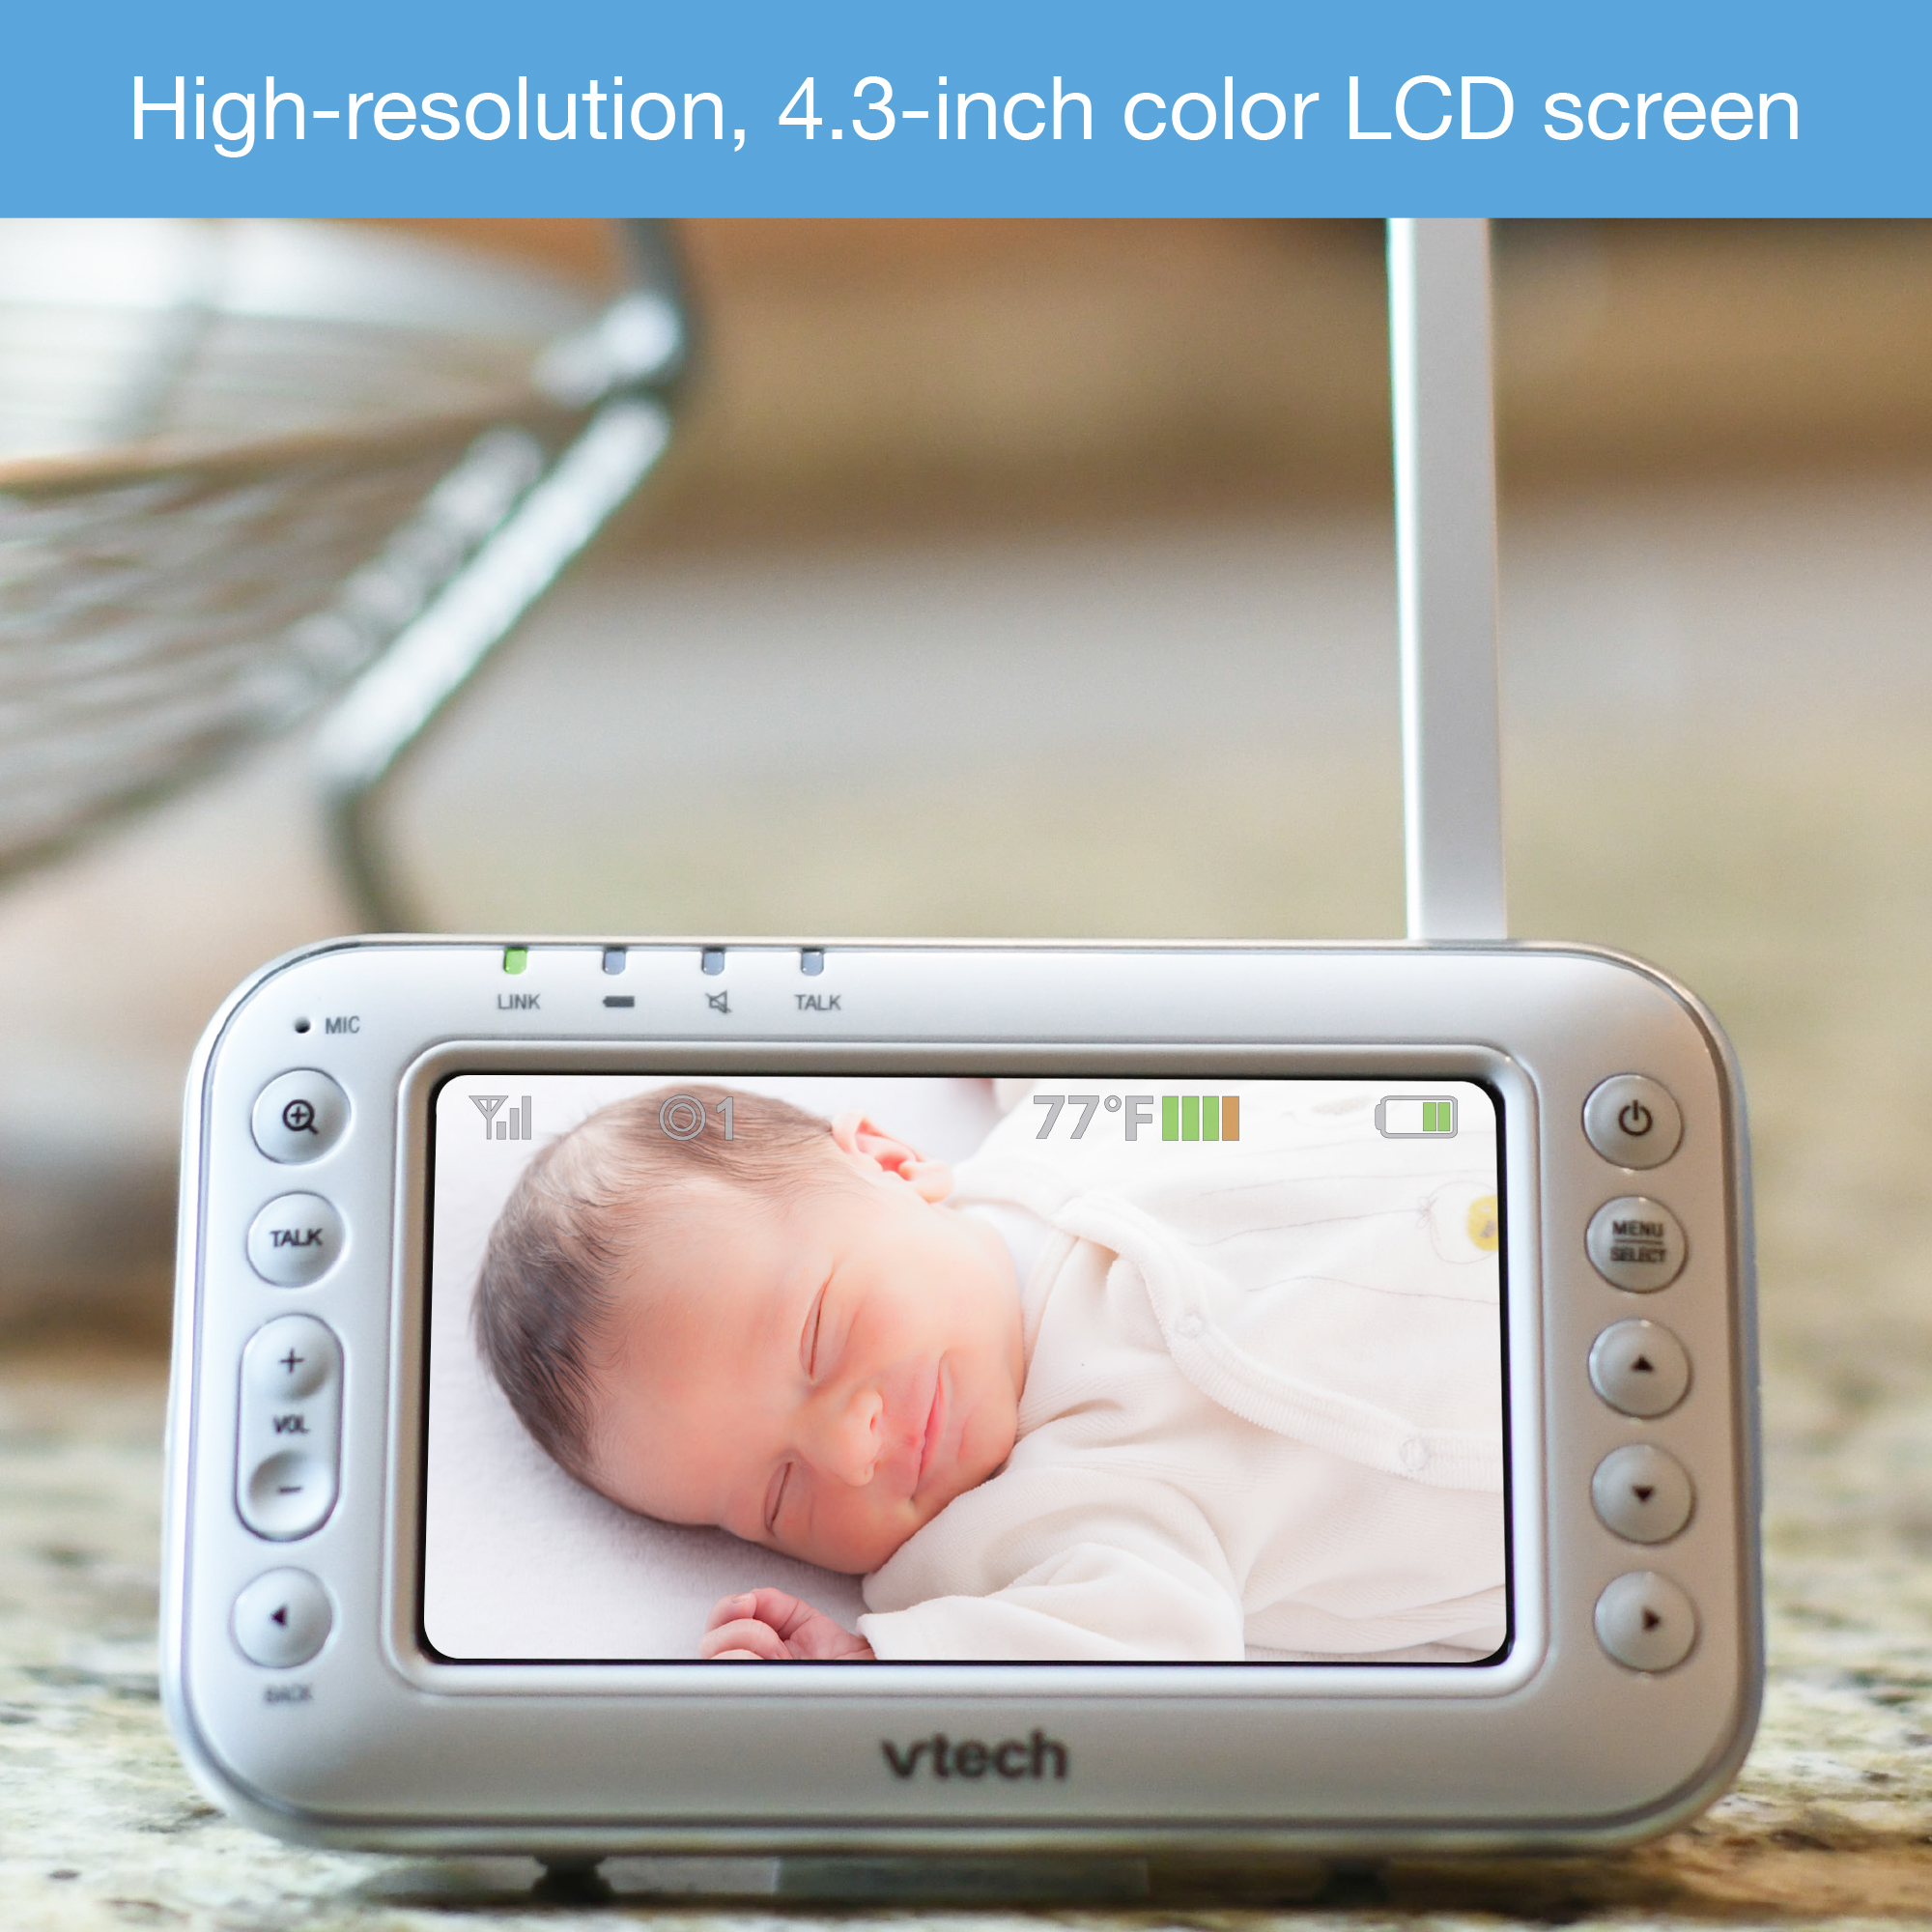 VTech VM4261, 4.3" Digital Video Baby Monitor with Pan & Tilt Camera, Wide-Angle Lens and Standard Lens, White - image 6 of 13